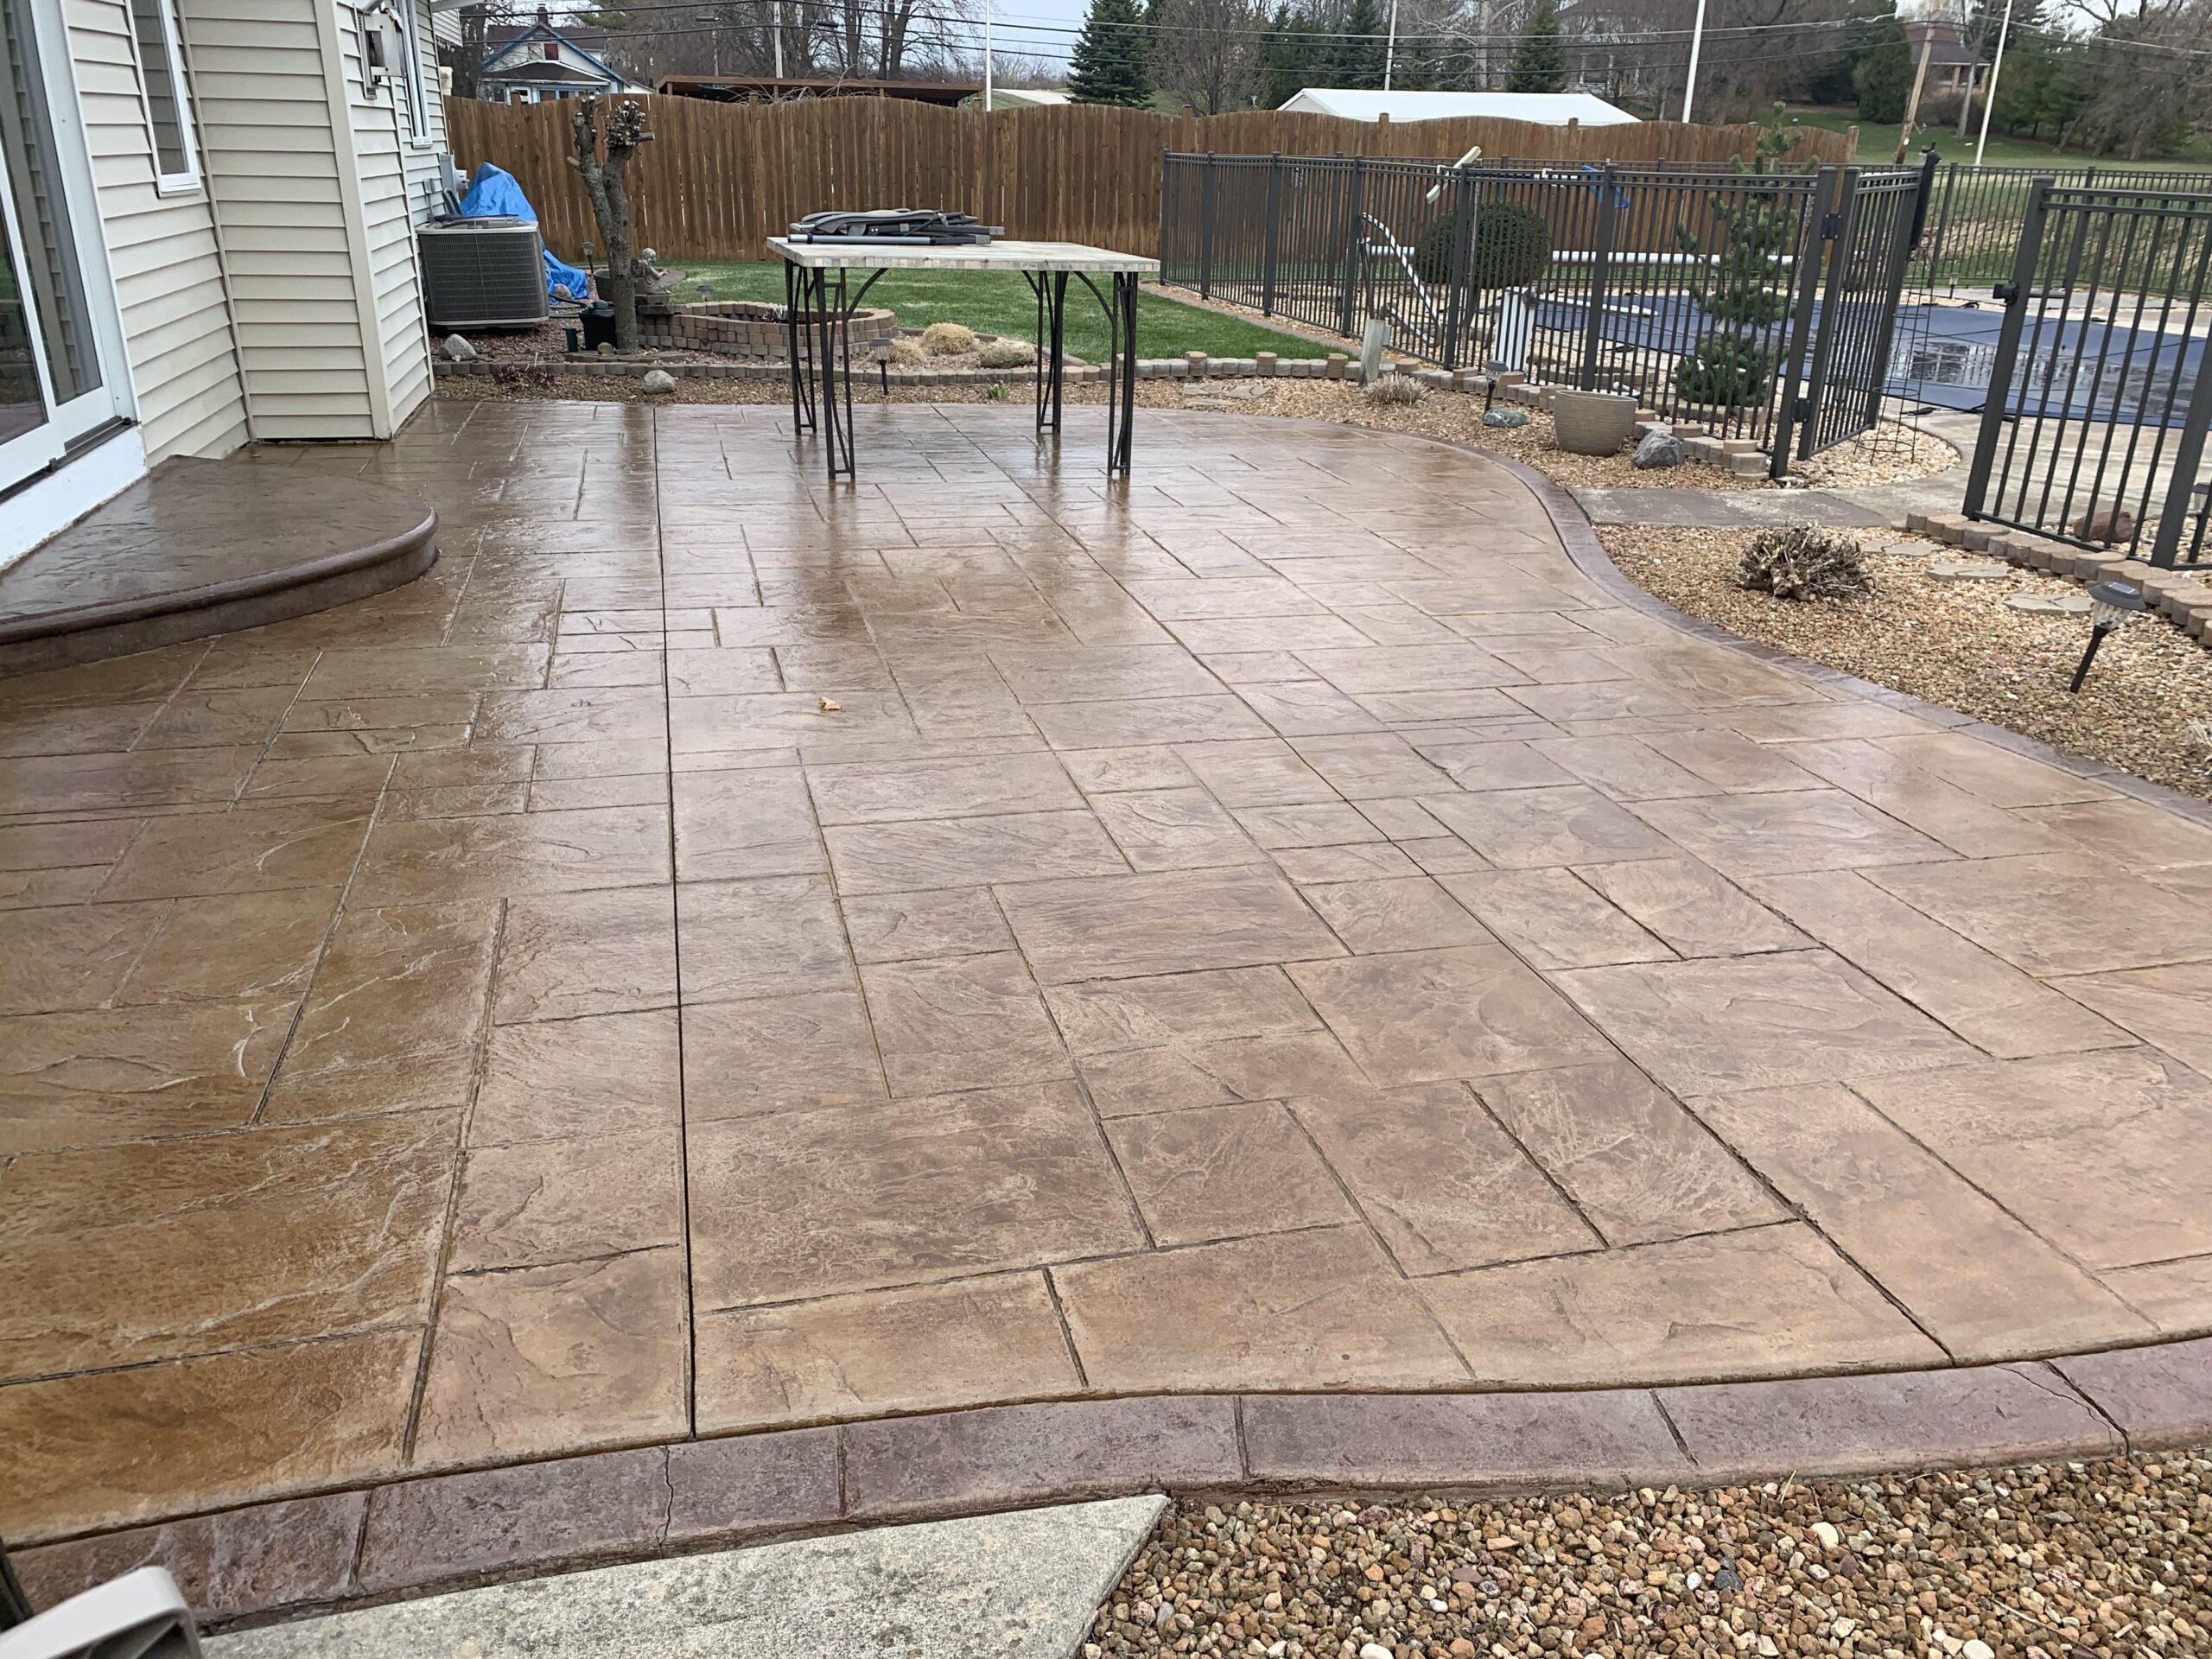 Cafe Royale and Aztec Brown Antiquing Stains on Stamped Concrete Patio